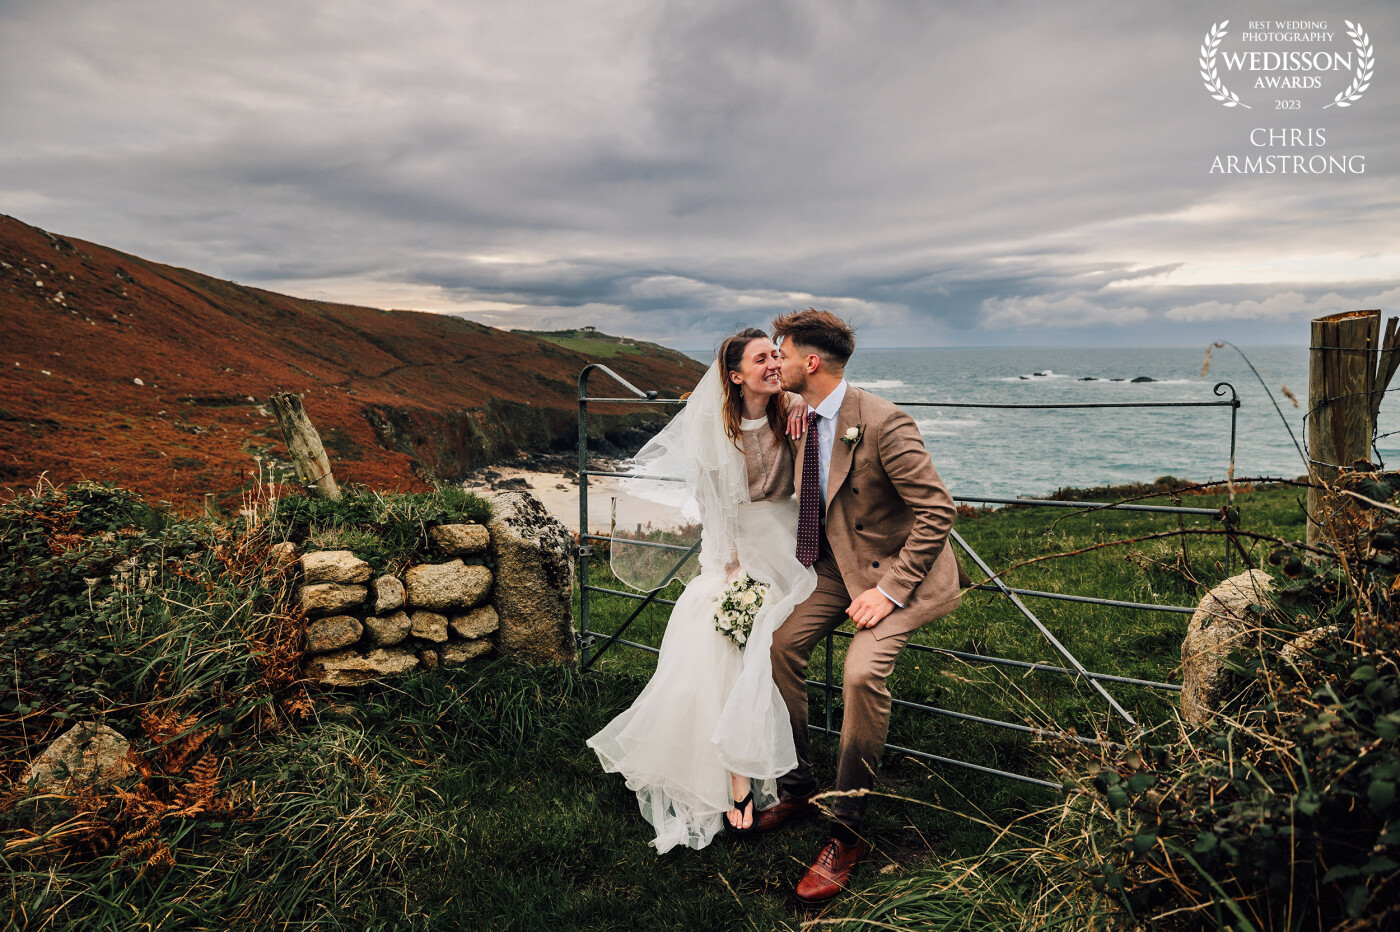 It’s a steep walk back to Lauren and Henry’s wedding venue from the stunning cove below, so I left them to have a moment but managed to grab this just as I headed off.